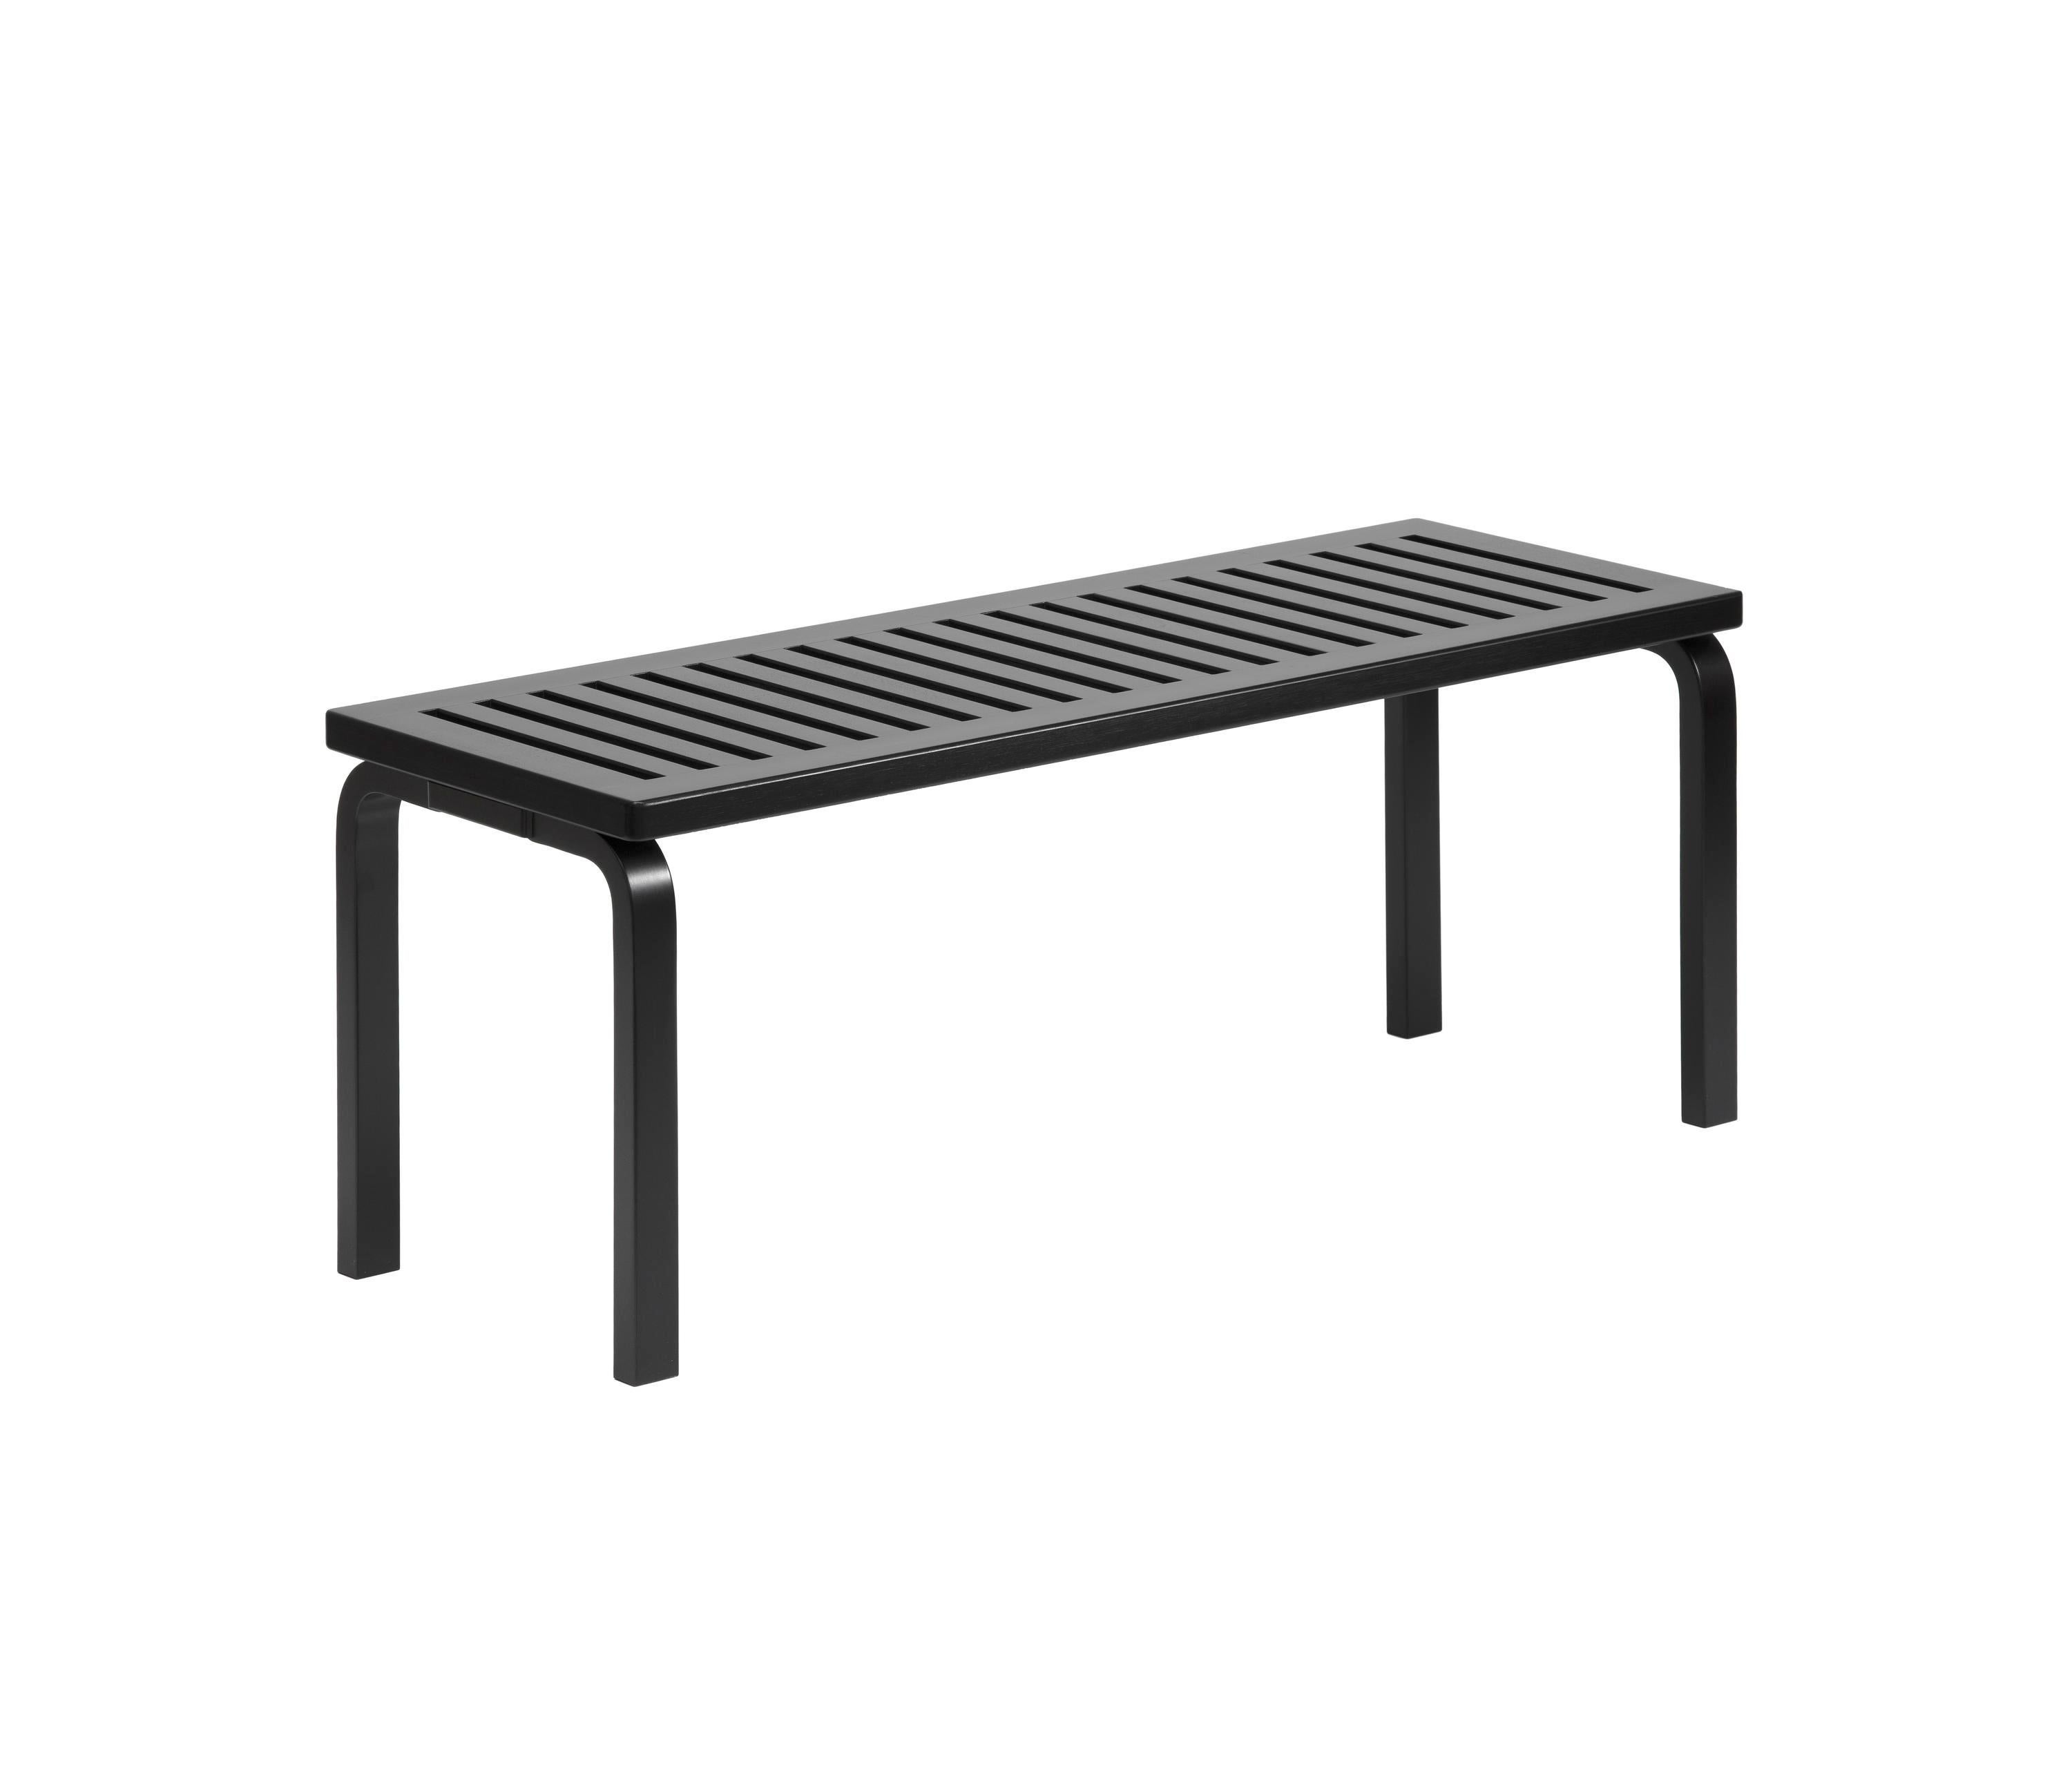 Alvar Aalto 153A Bench for Artek in Solid Birch. Designed in 1945 and produced by its original manufacturer, Artek of Finland. Executed in solid birch wood with natural lacquer finish. New in box with “Certificate of Authenticity”. These benches